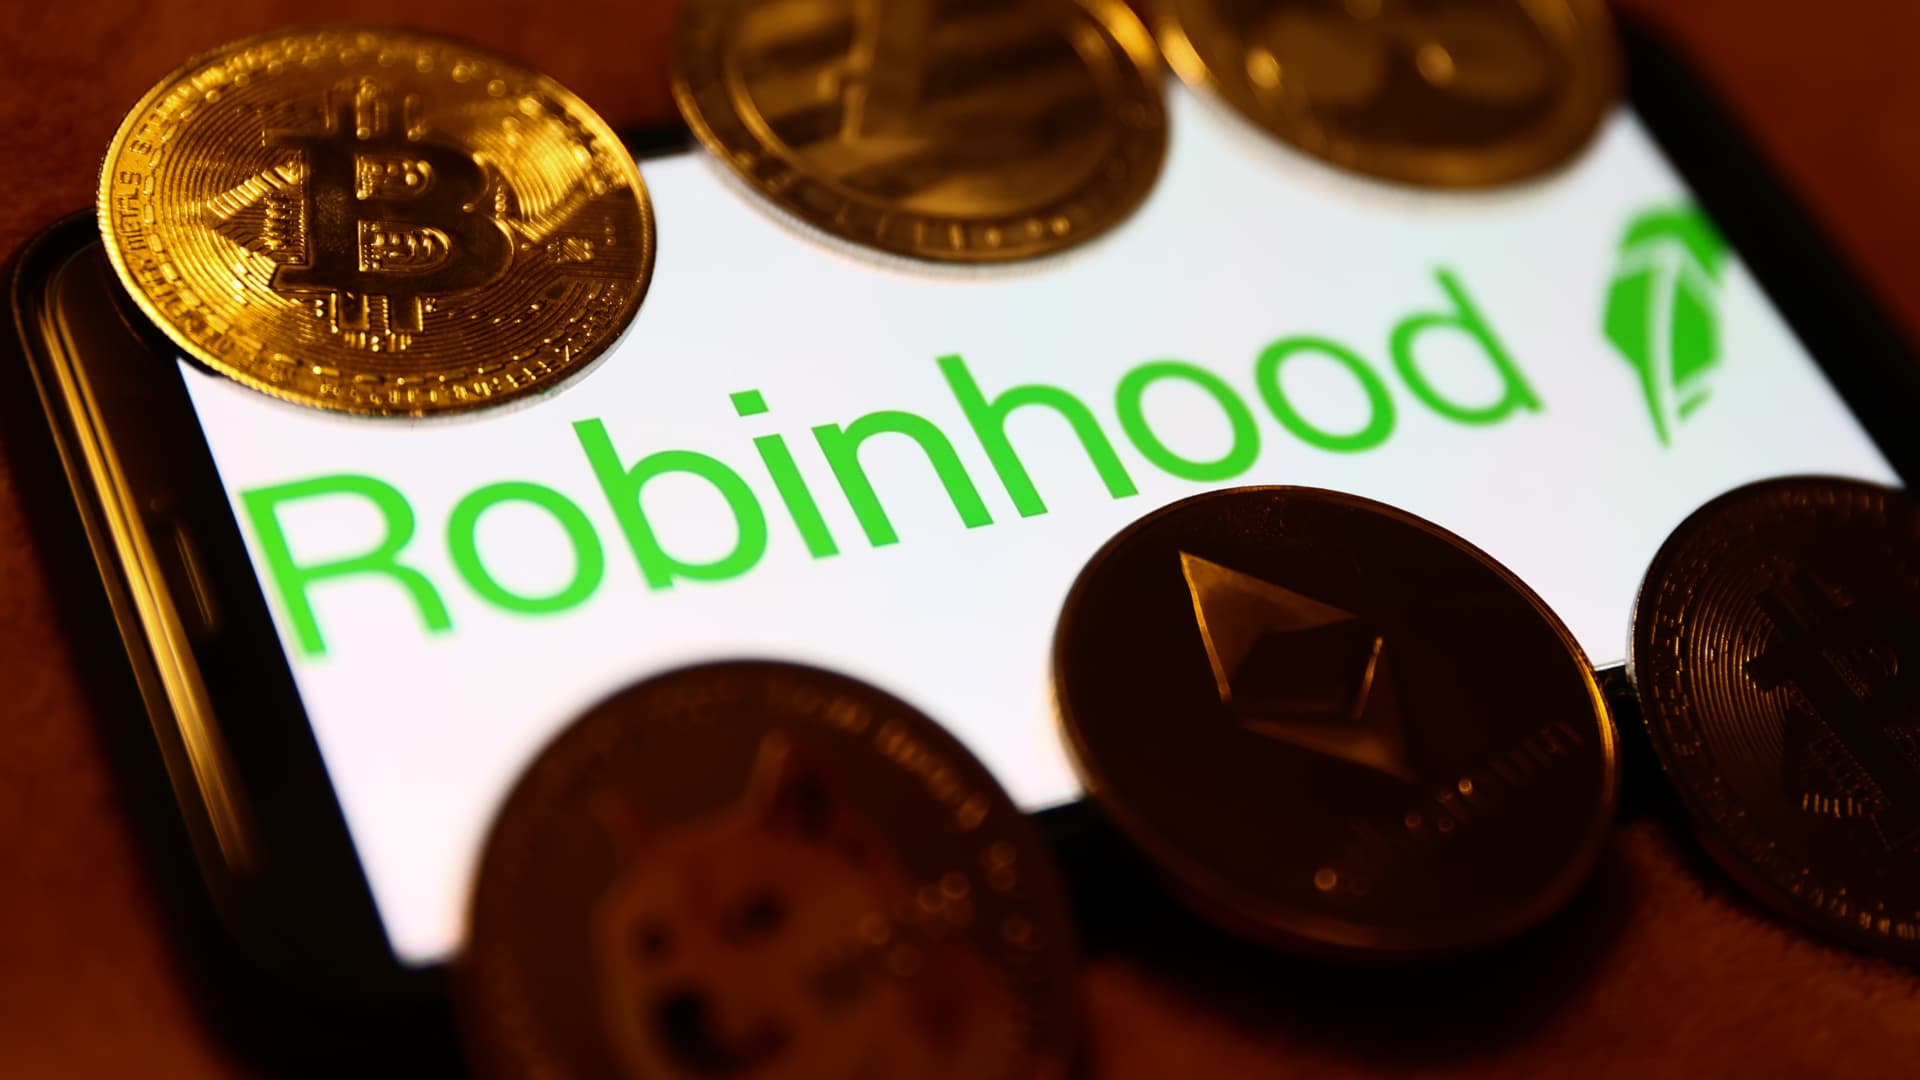 Robinhood launches crypto trading service in the EU